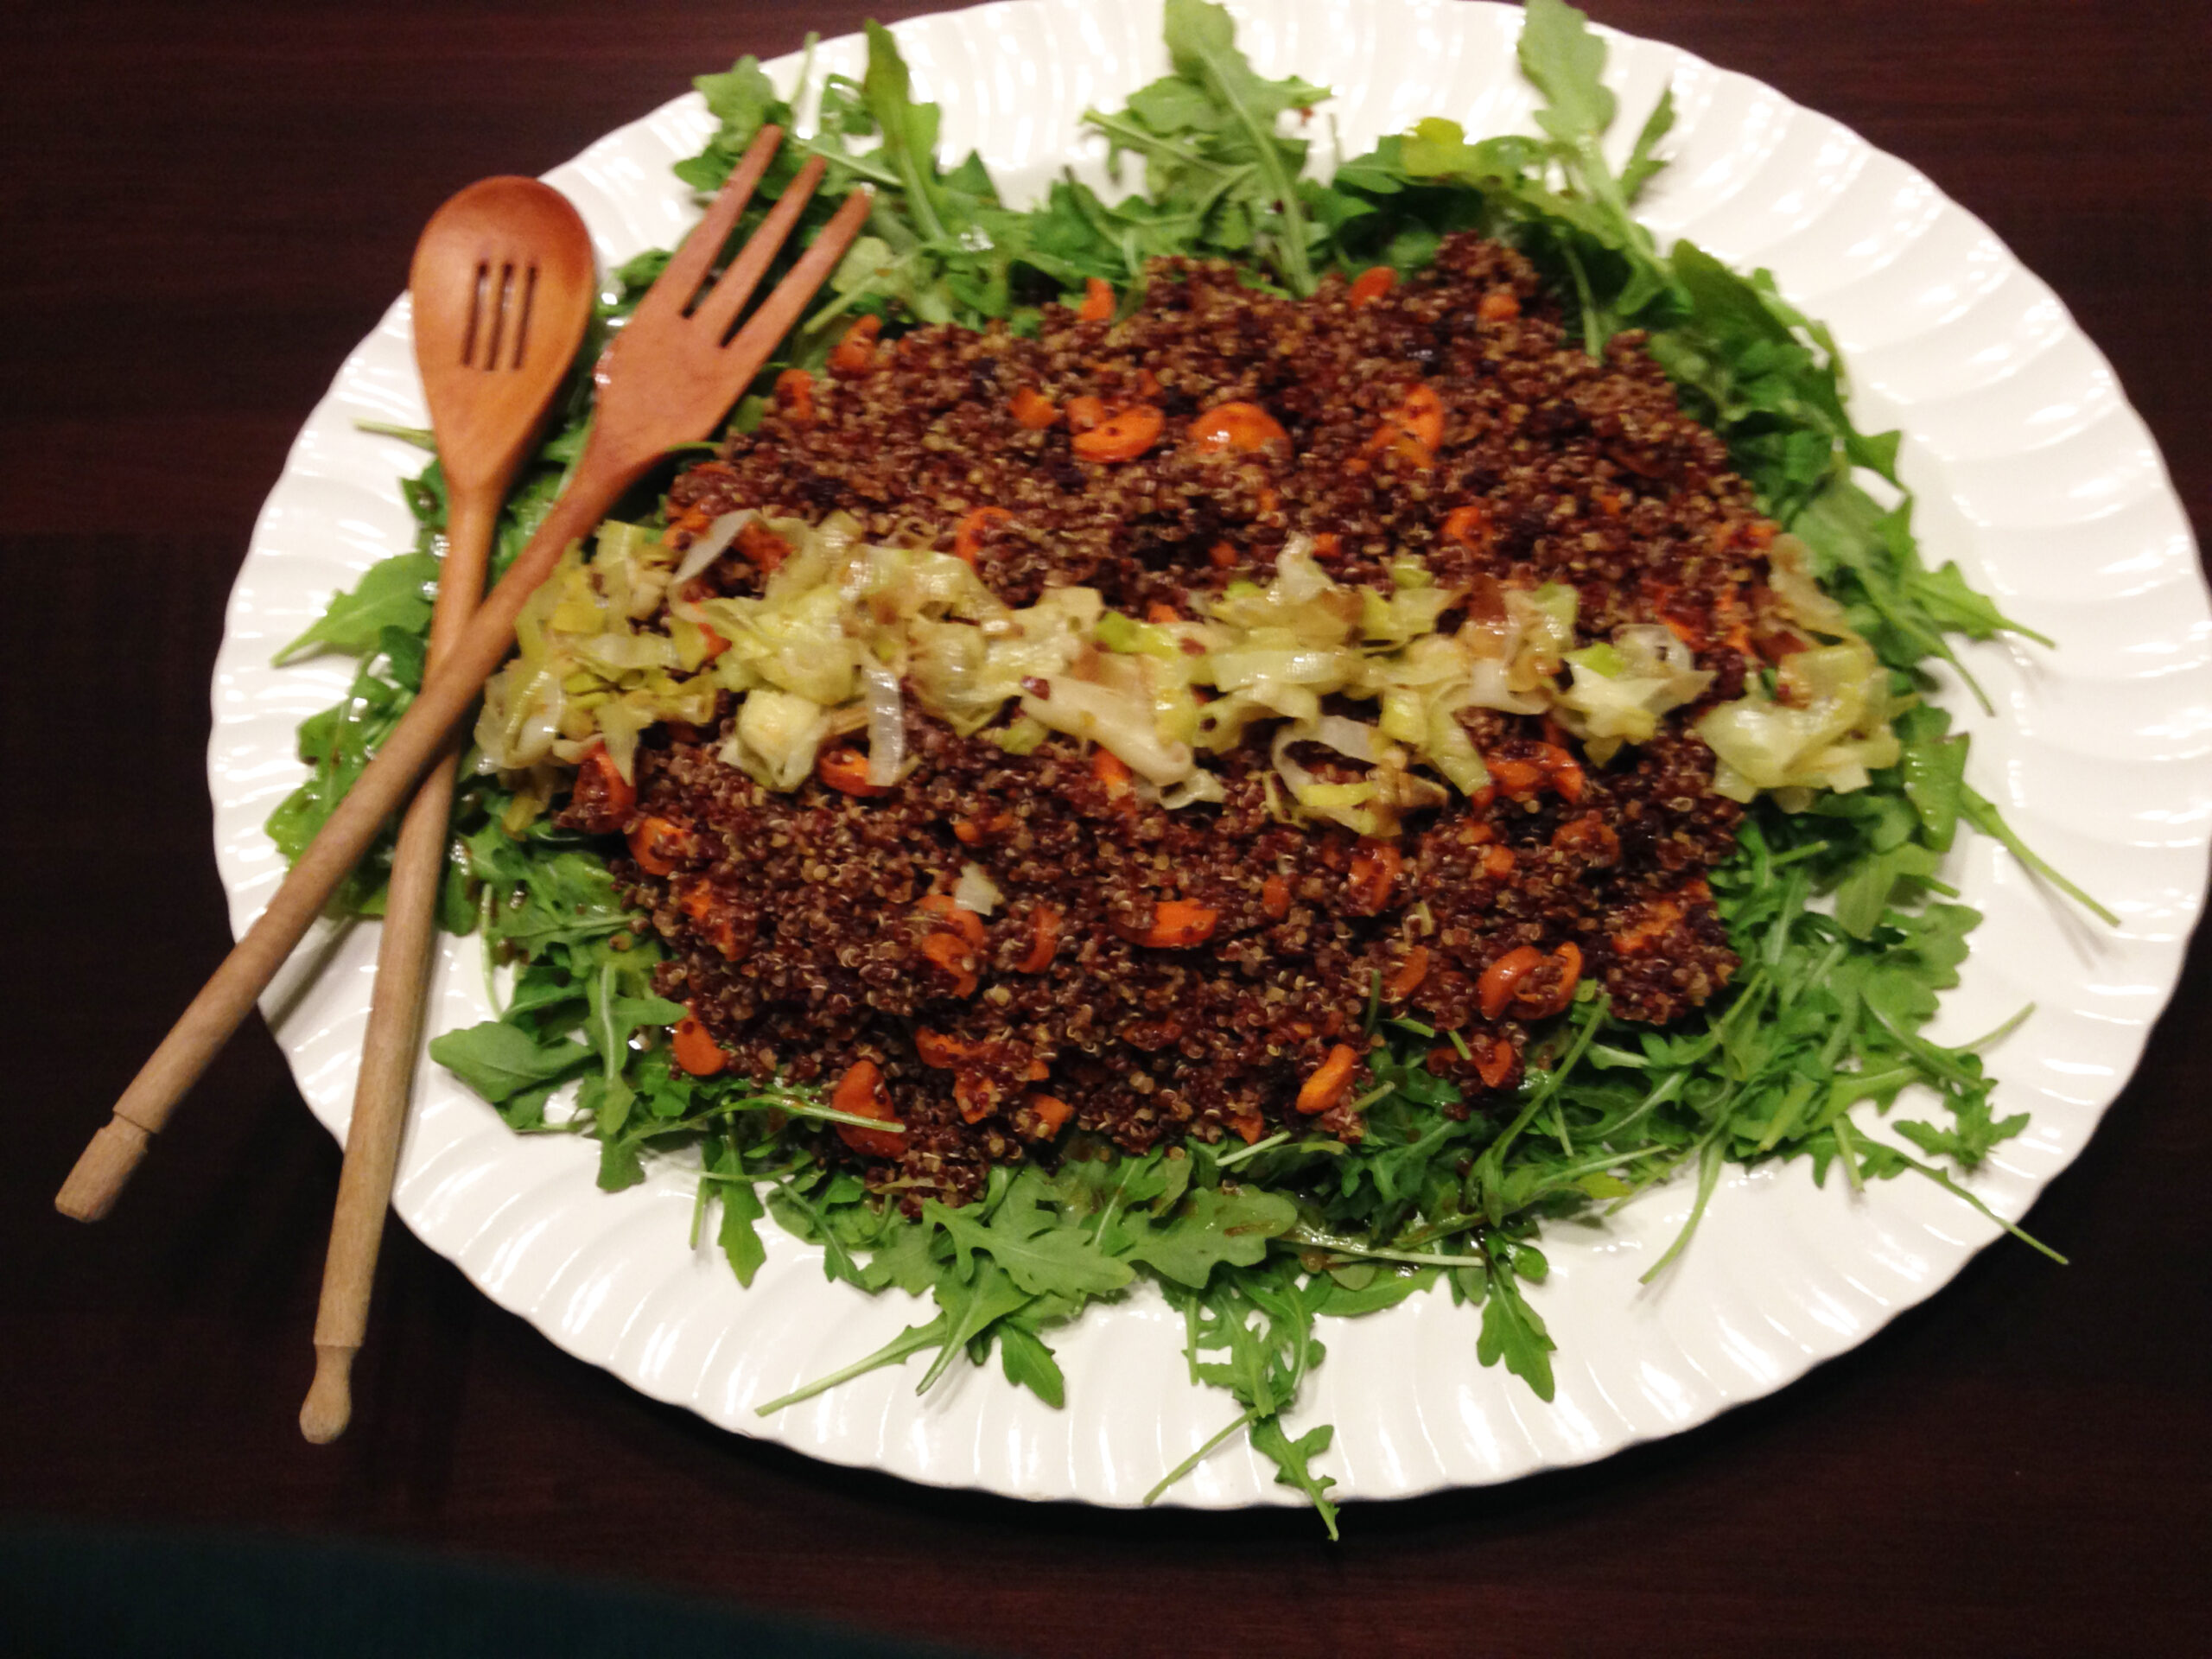 Prepared and artfully displayed recipe Quinoa Salad with Carrots and Frizzled Leeks